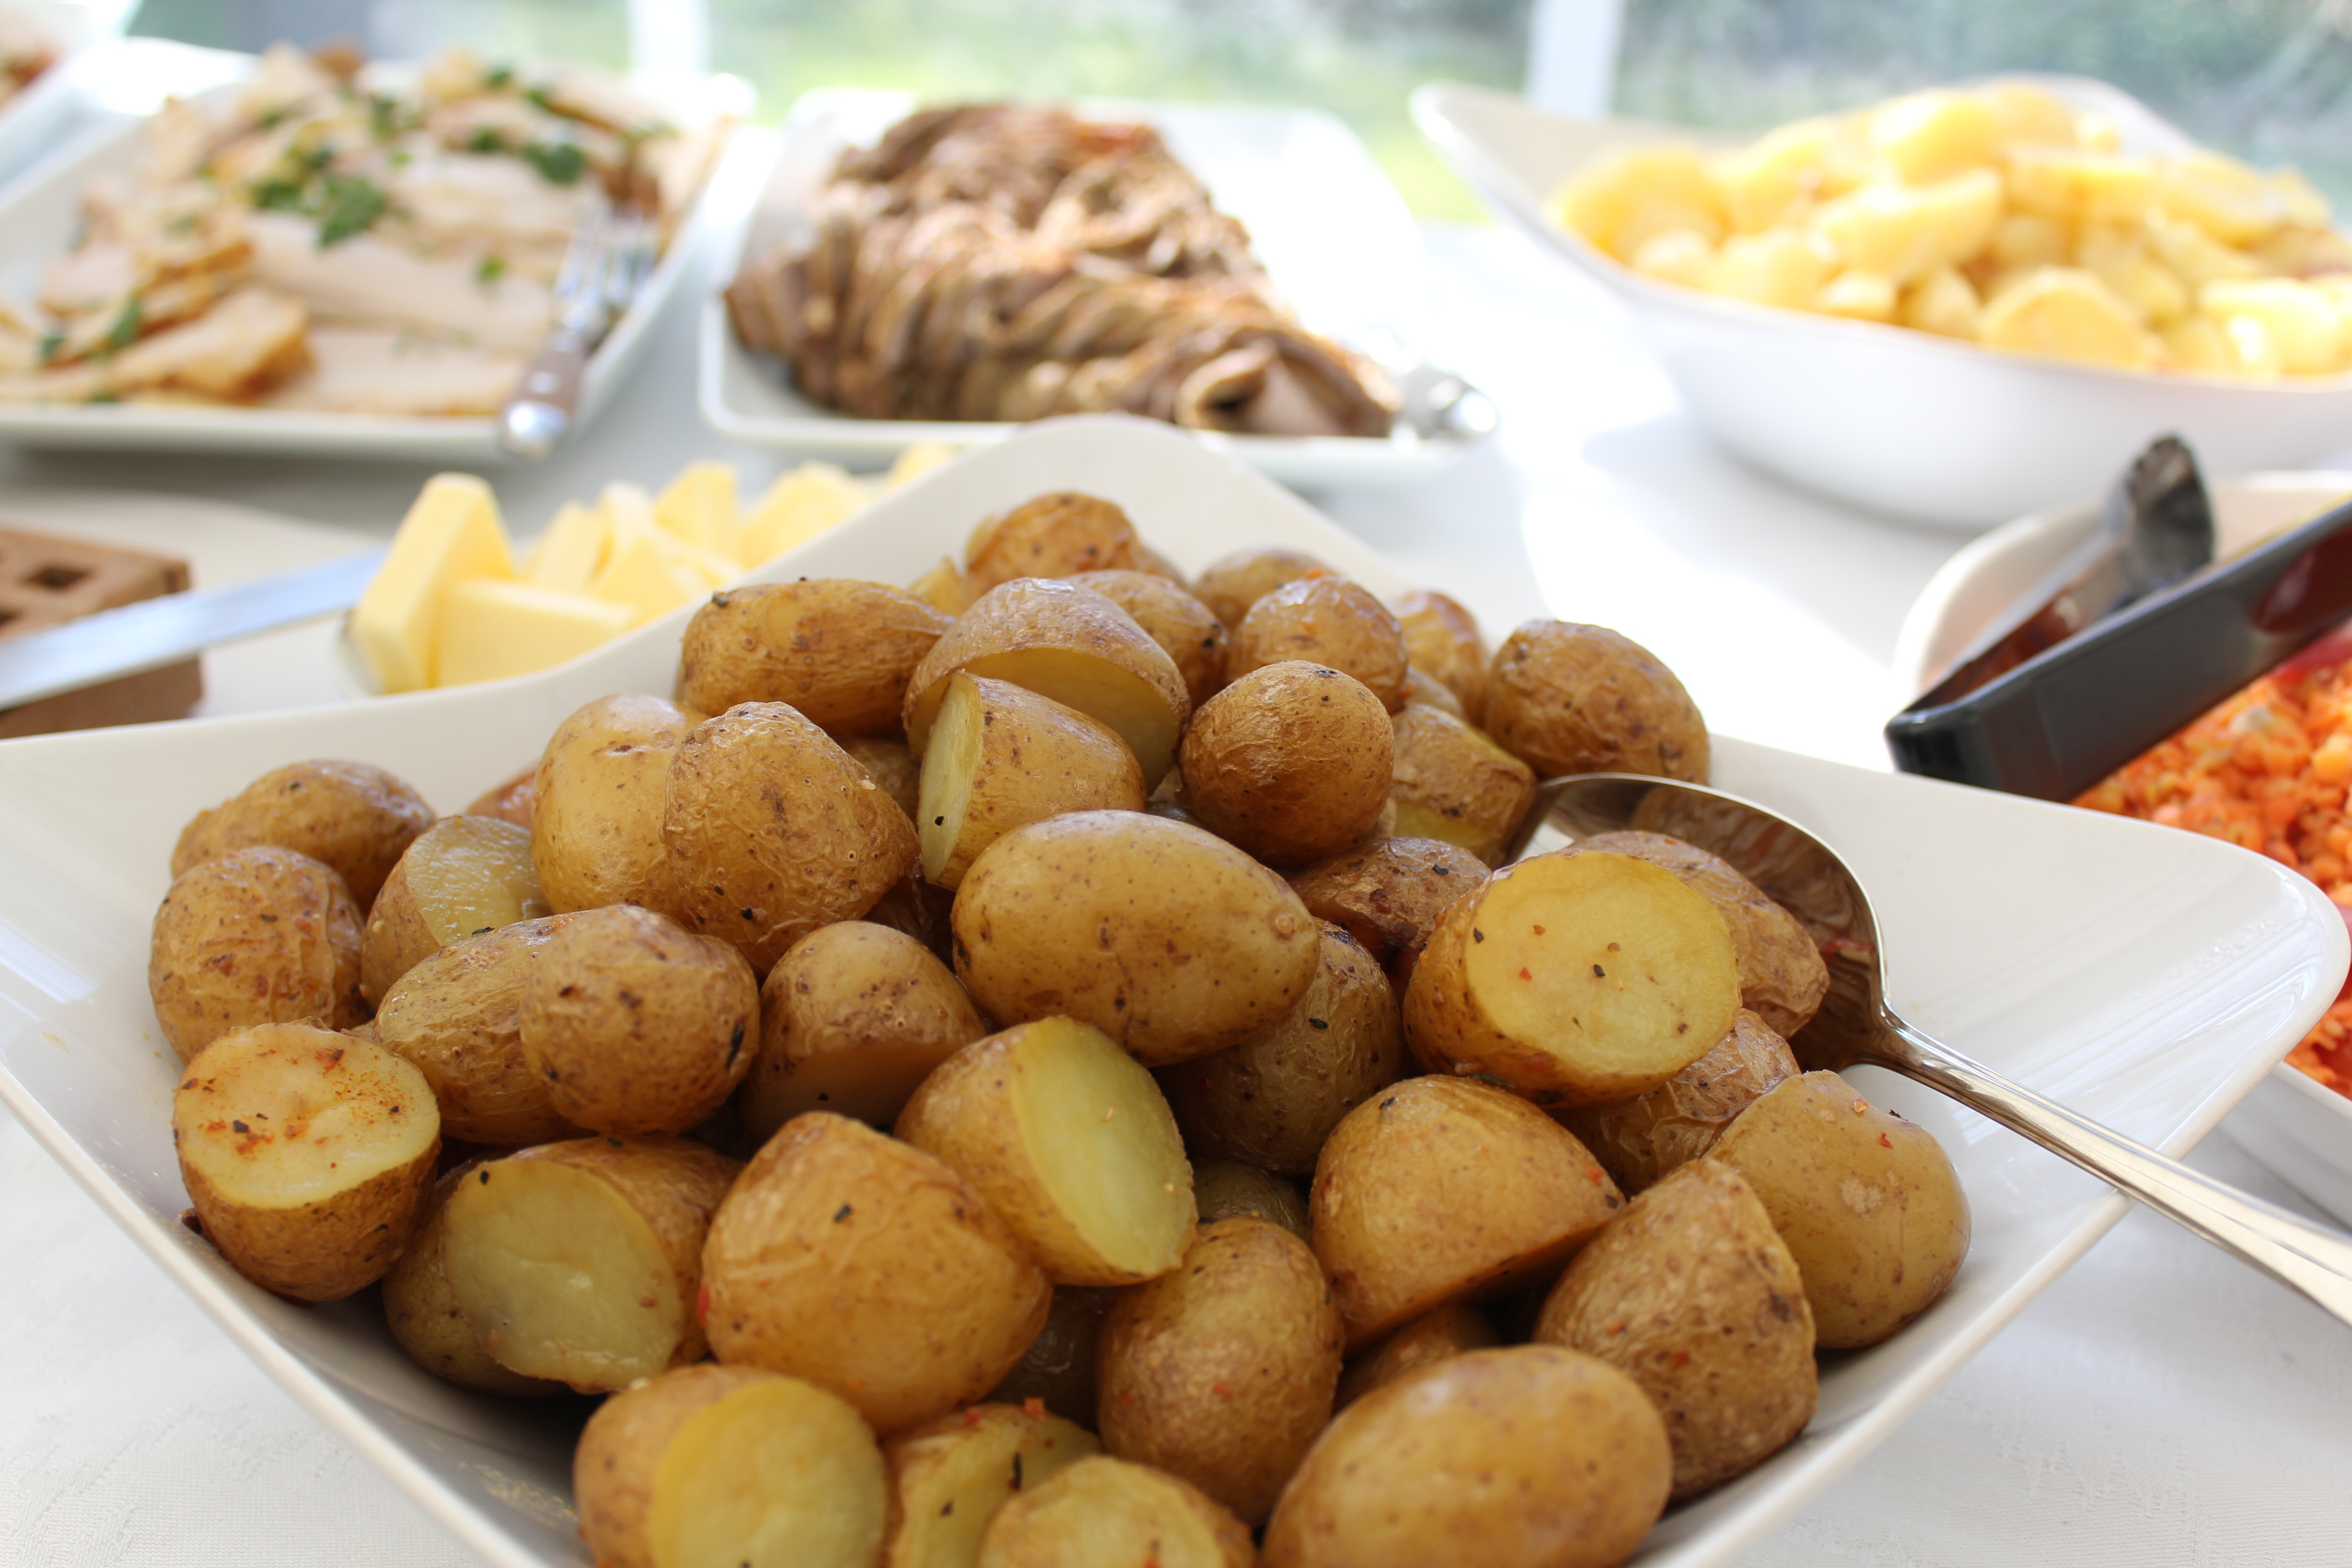 A heaped plate of potatoes by hagelund